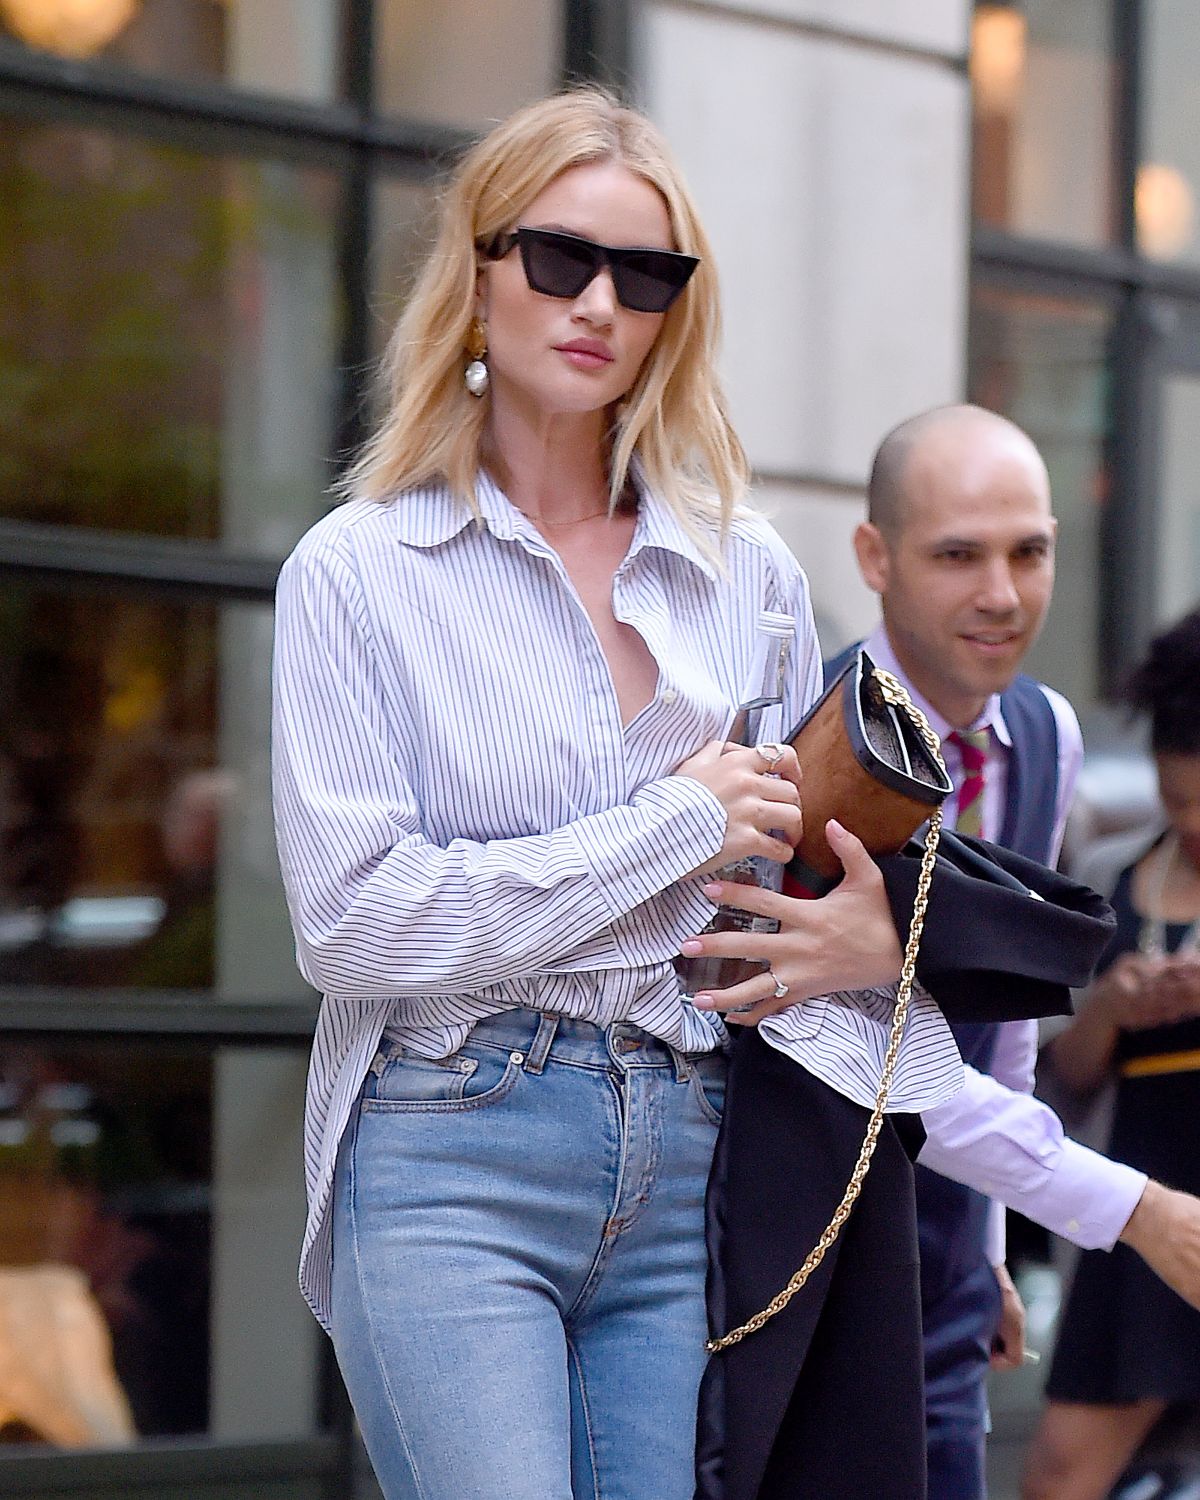 ROSIE HUNTINGTON-WHITELEY Out and About in New York 07/18/2018 – HawtCelebs